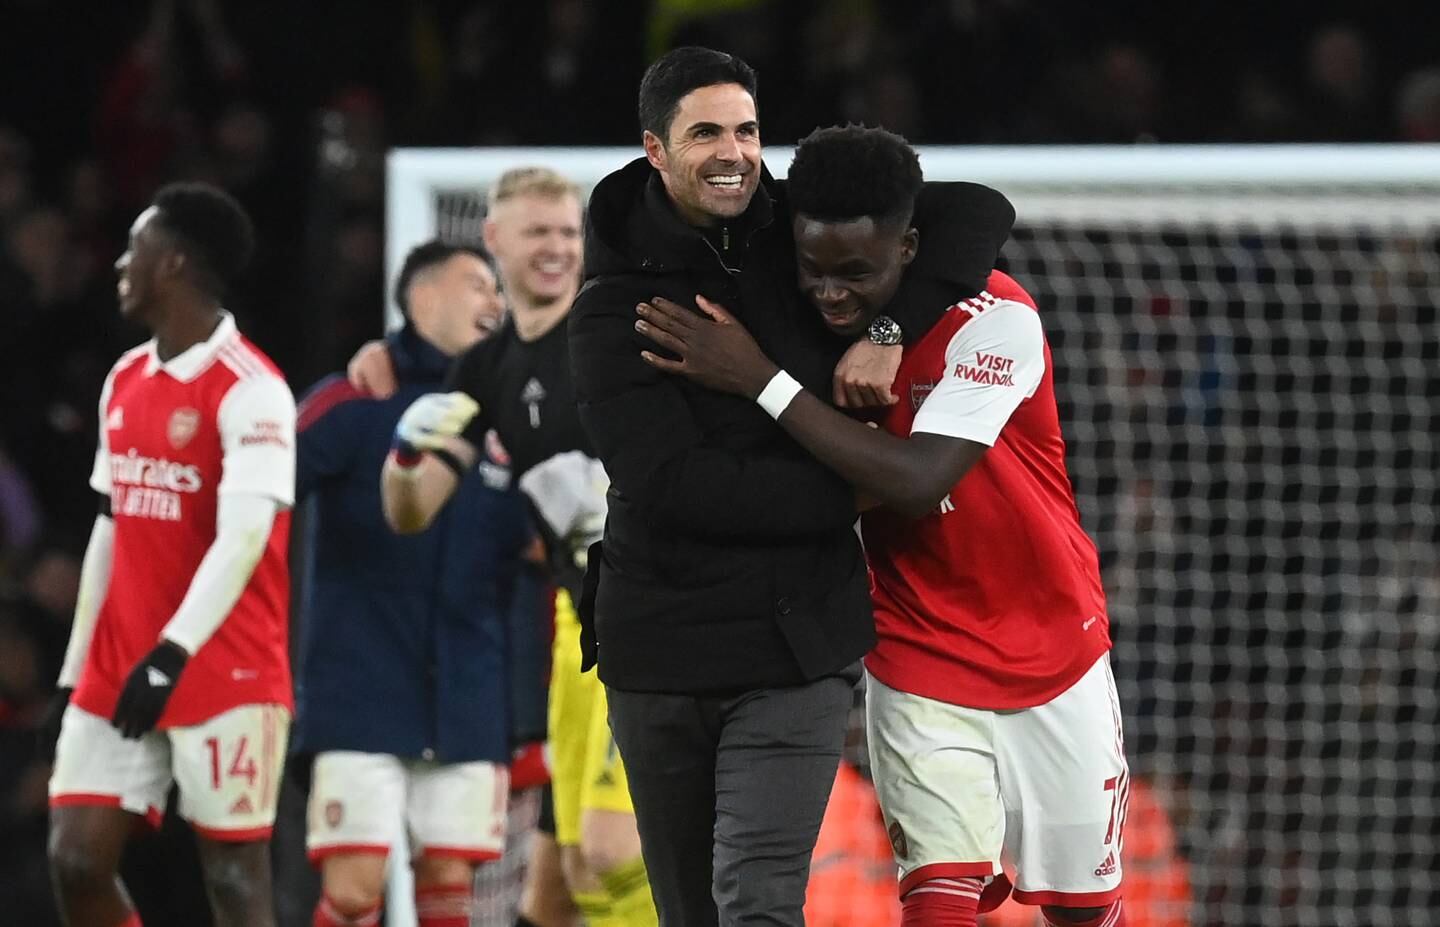 Arsenal manager Mikel Arteta and Bukayo Saka embrace after their team's victory. EPA.